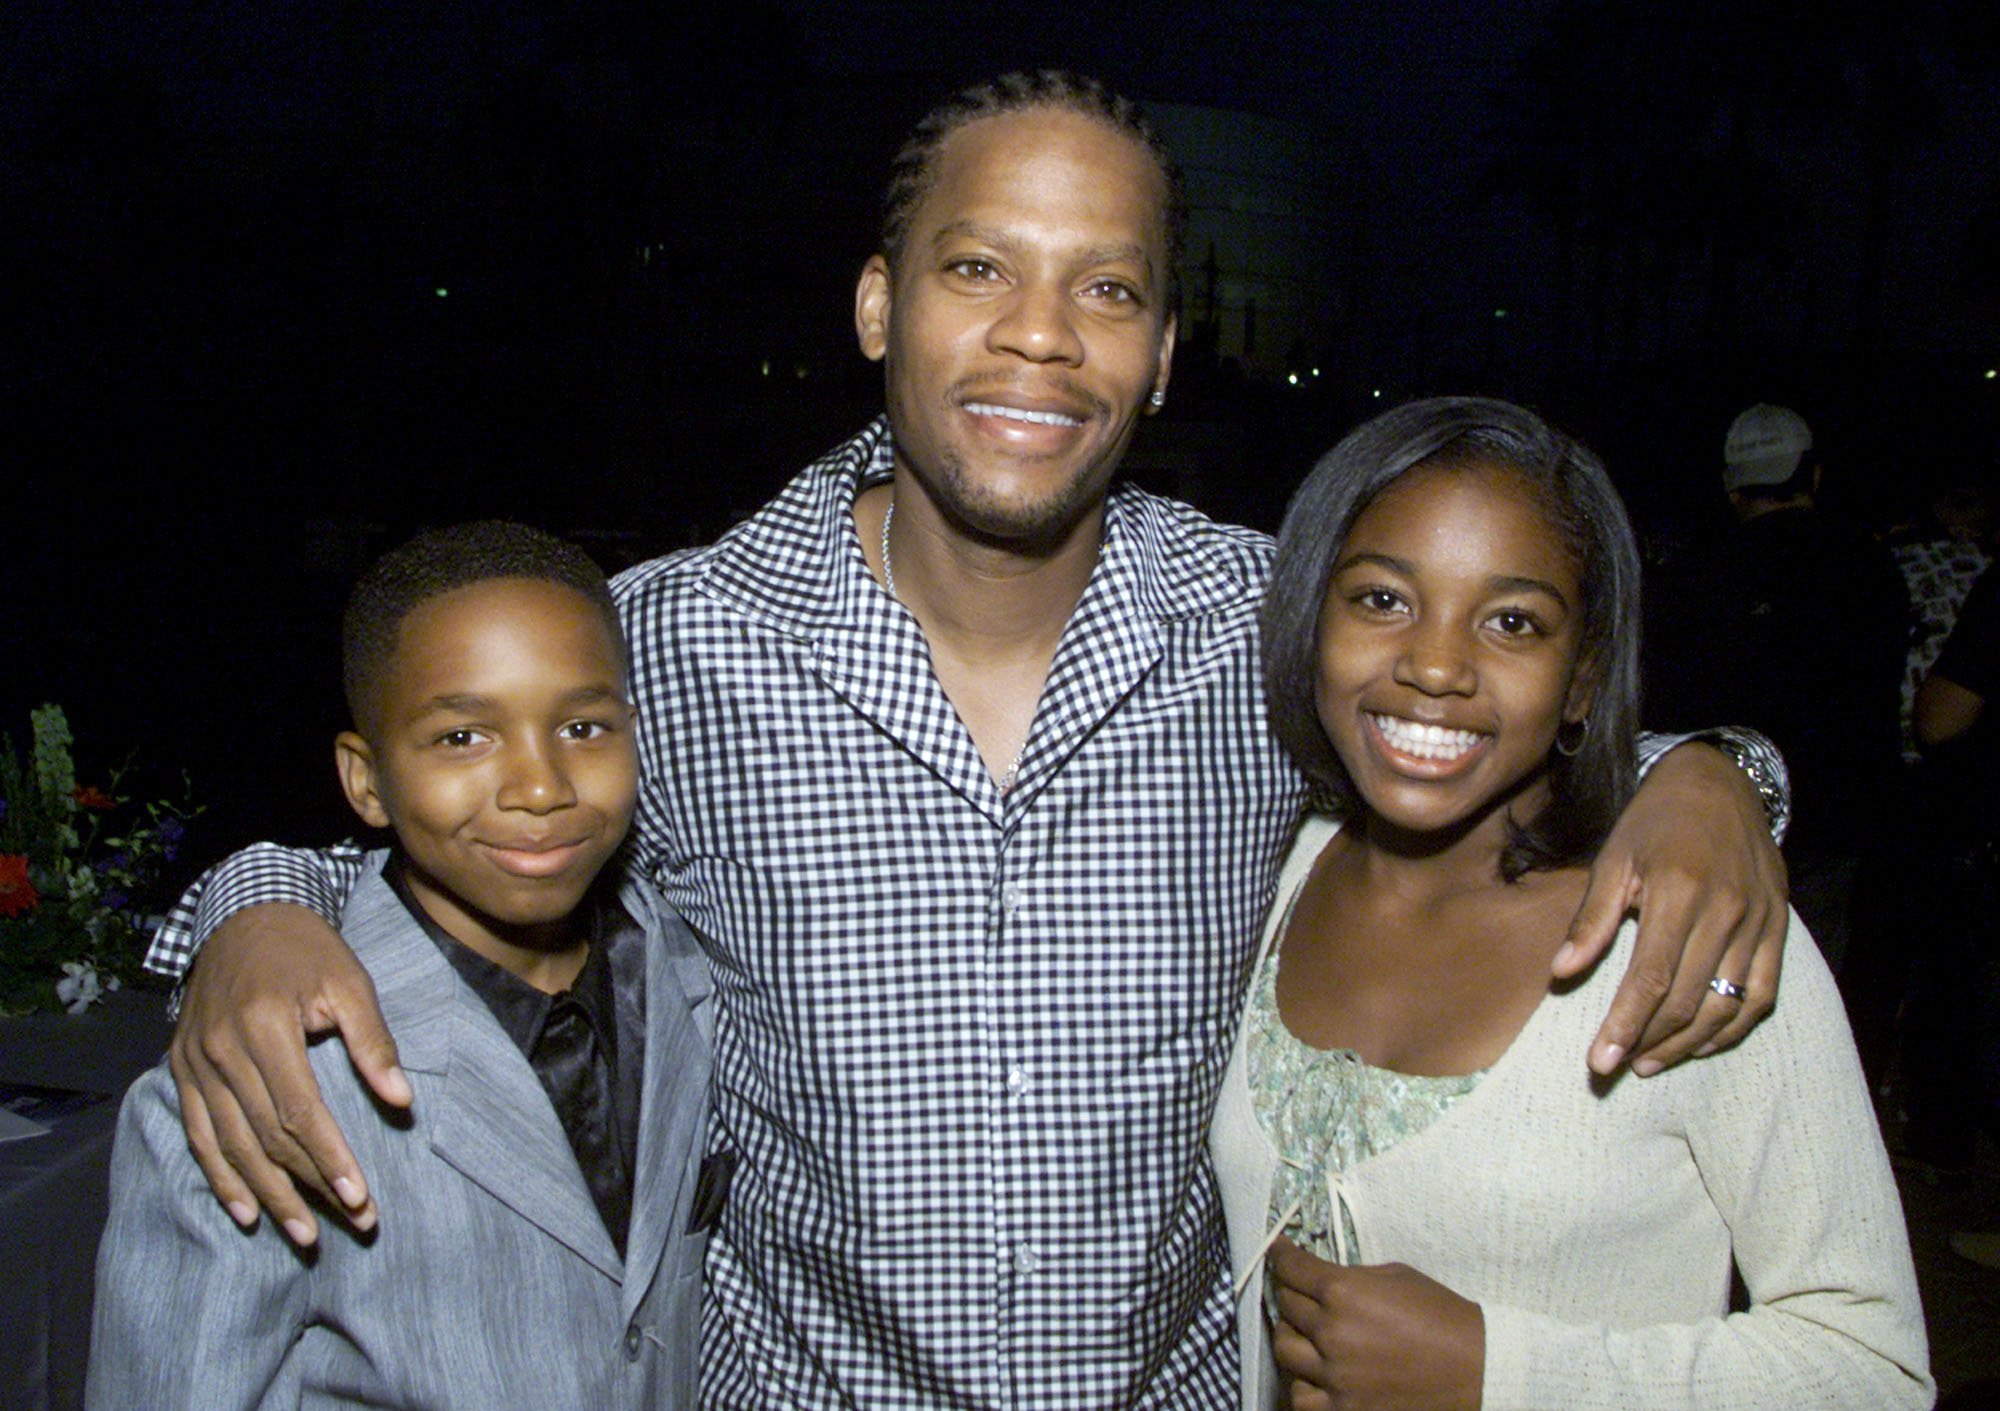 Stars of "The Hughleys," Dee Jay Daniels, D.L. Hughley and Ashley Monique Clark at UPN's summer tour party for the Television Critics Association at Paramount Studios in Los Angeles, Ca. on July 16, 2001. | Source: Getty Images